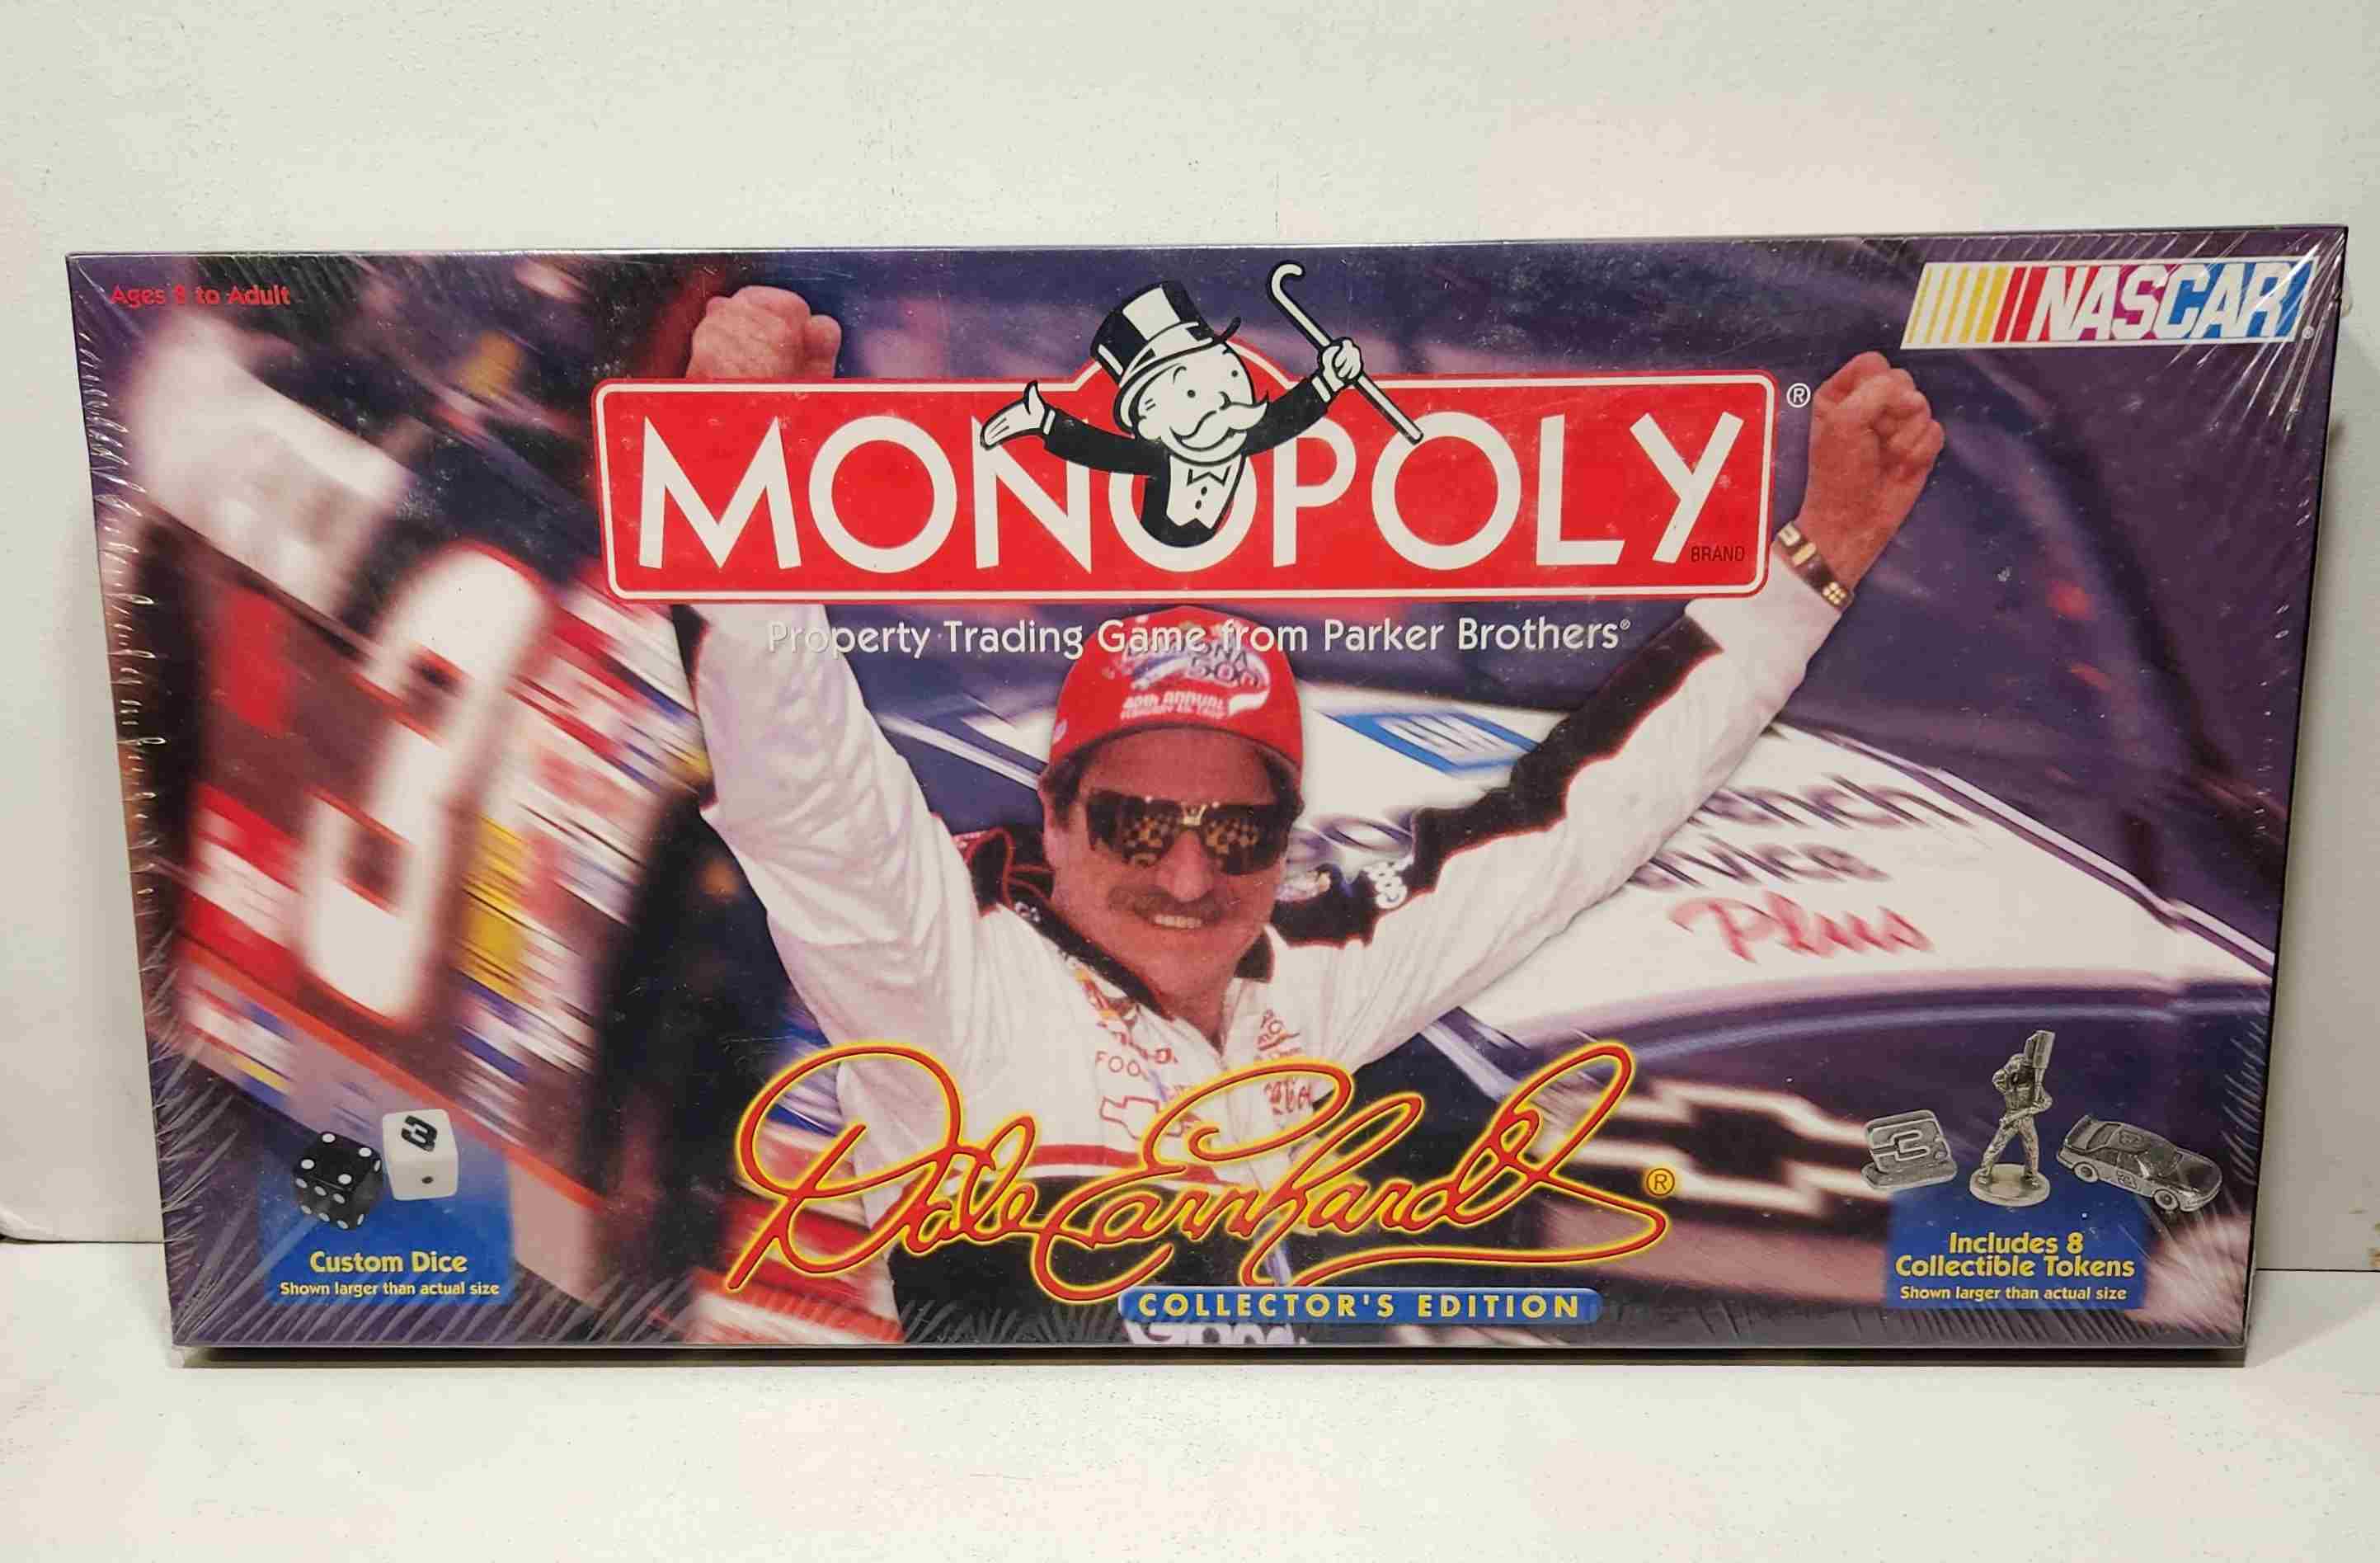 2001 Dale Earnhardt "Collector's Edition" Monopoly